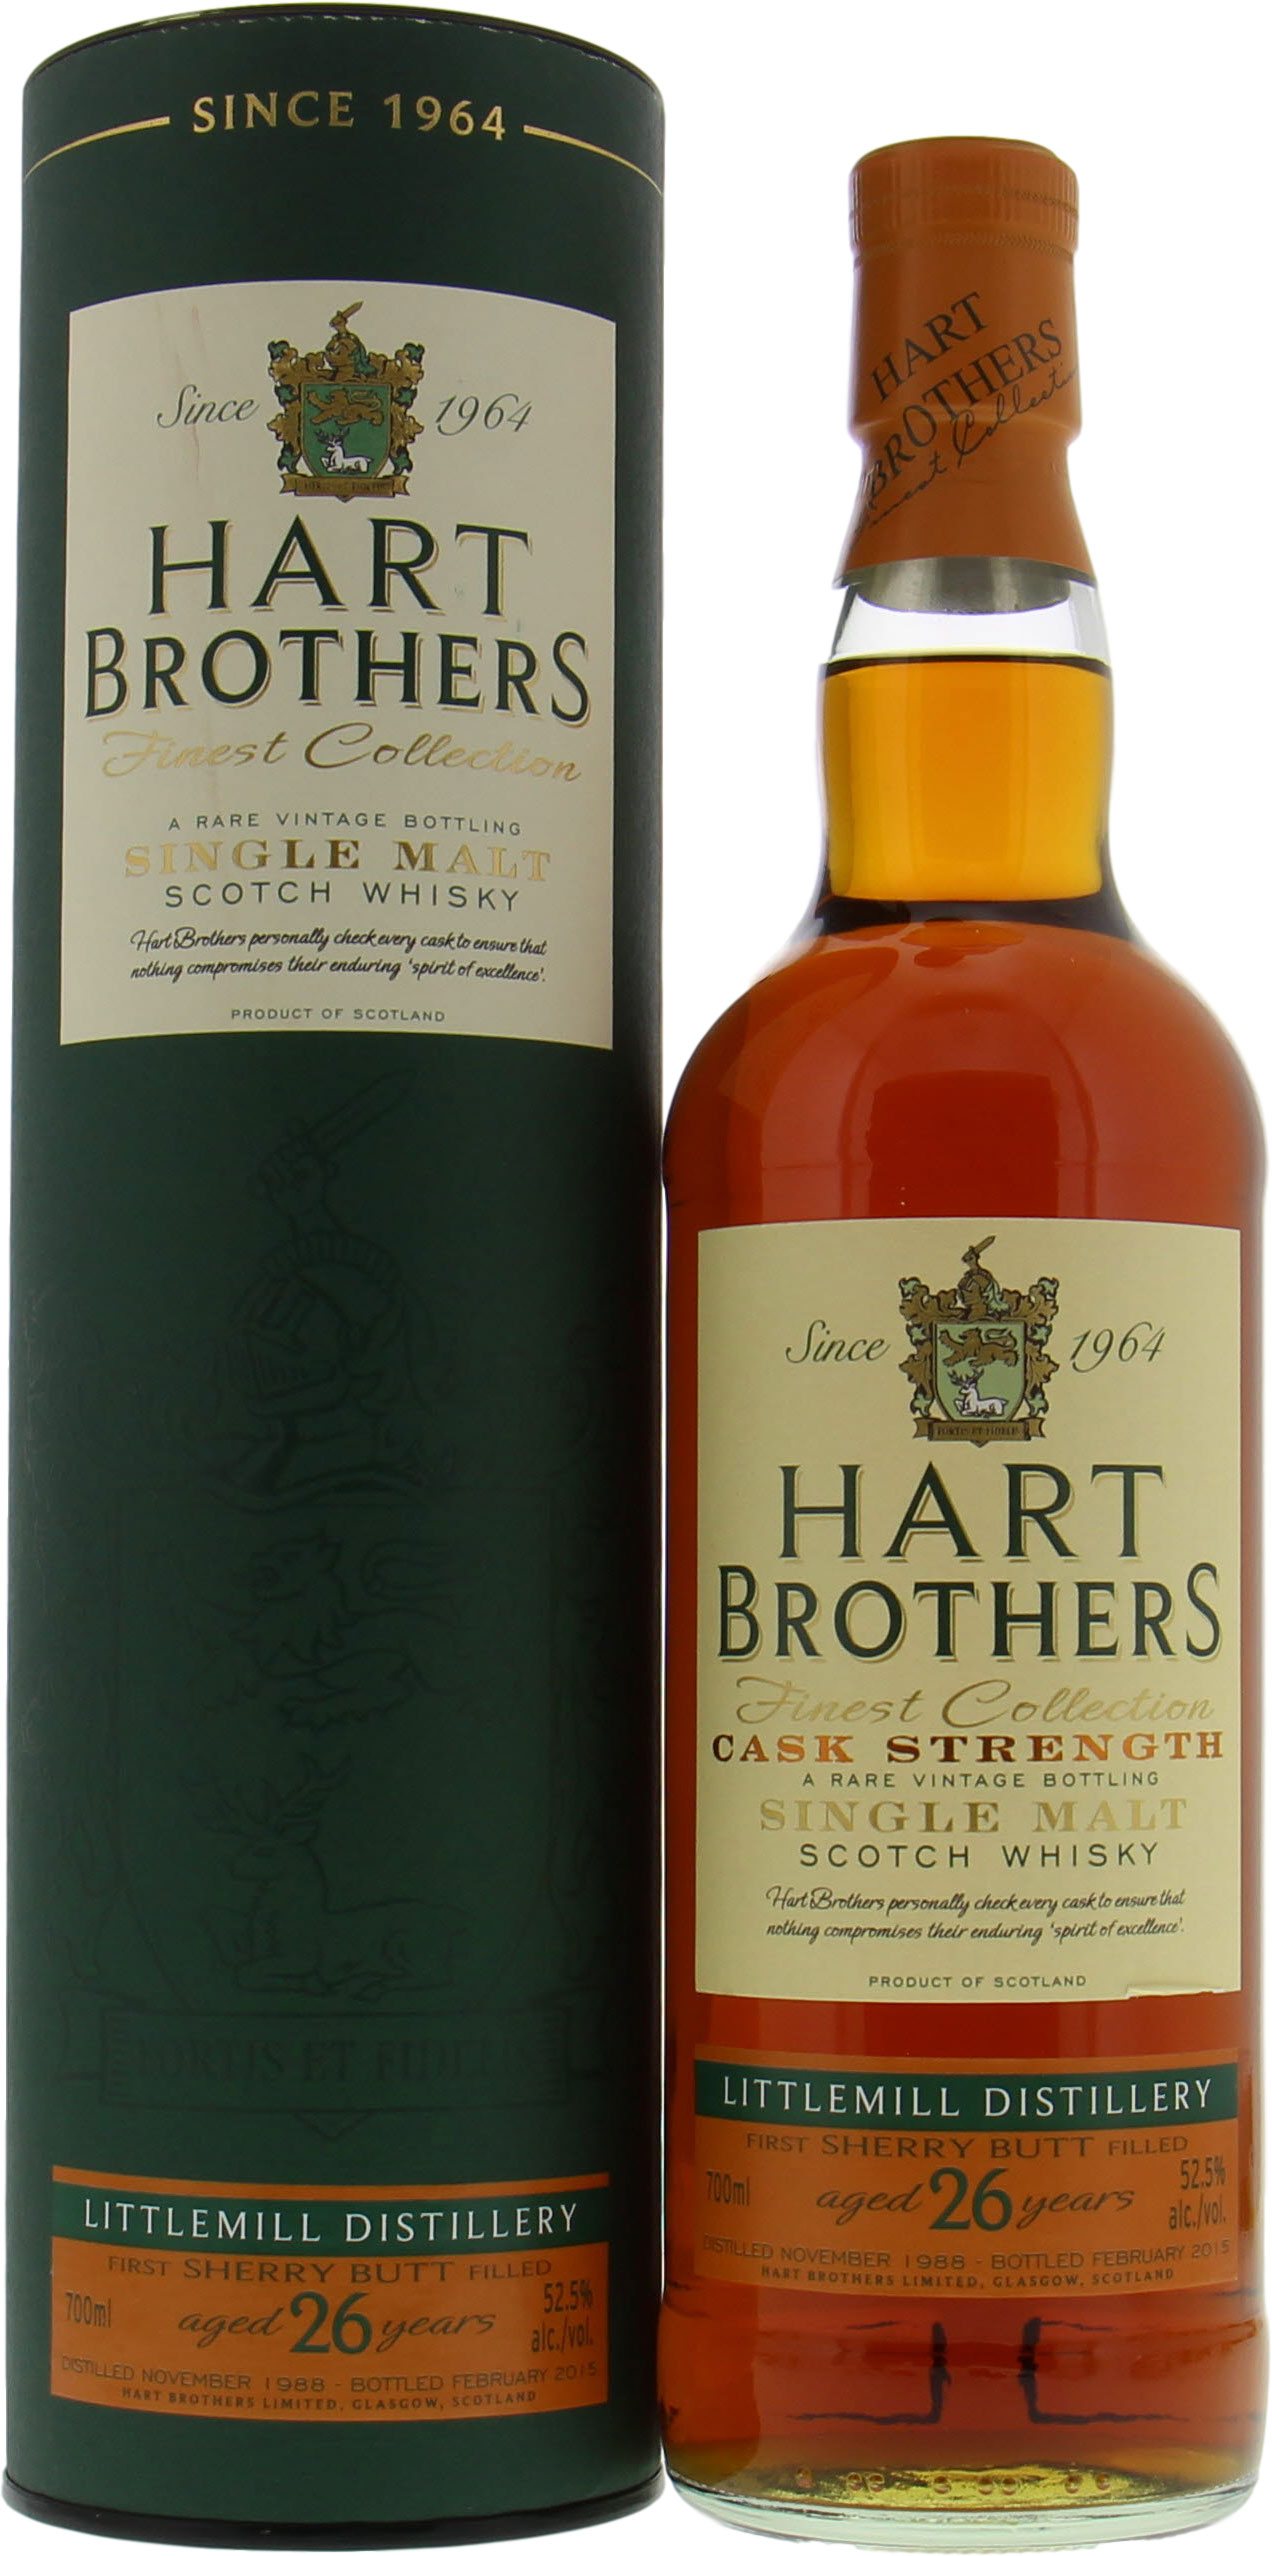 Littlemill - 26 Years Old Hart Brothers Sherry Butt Cask Strength 52.5% 1988